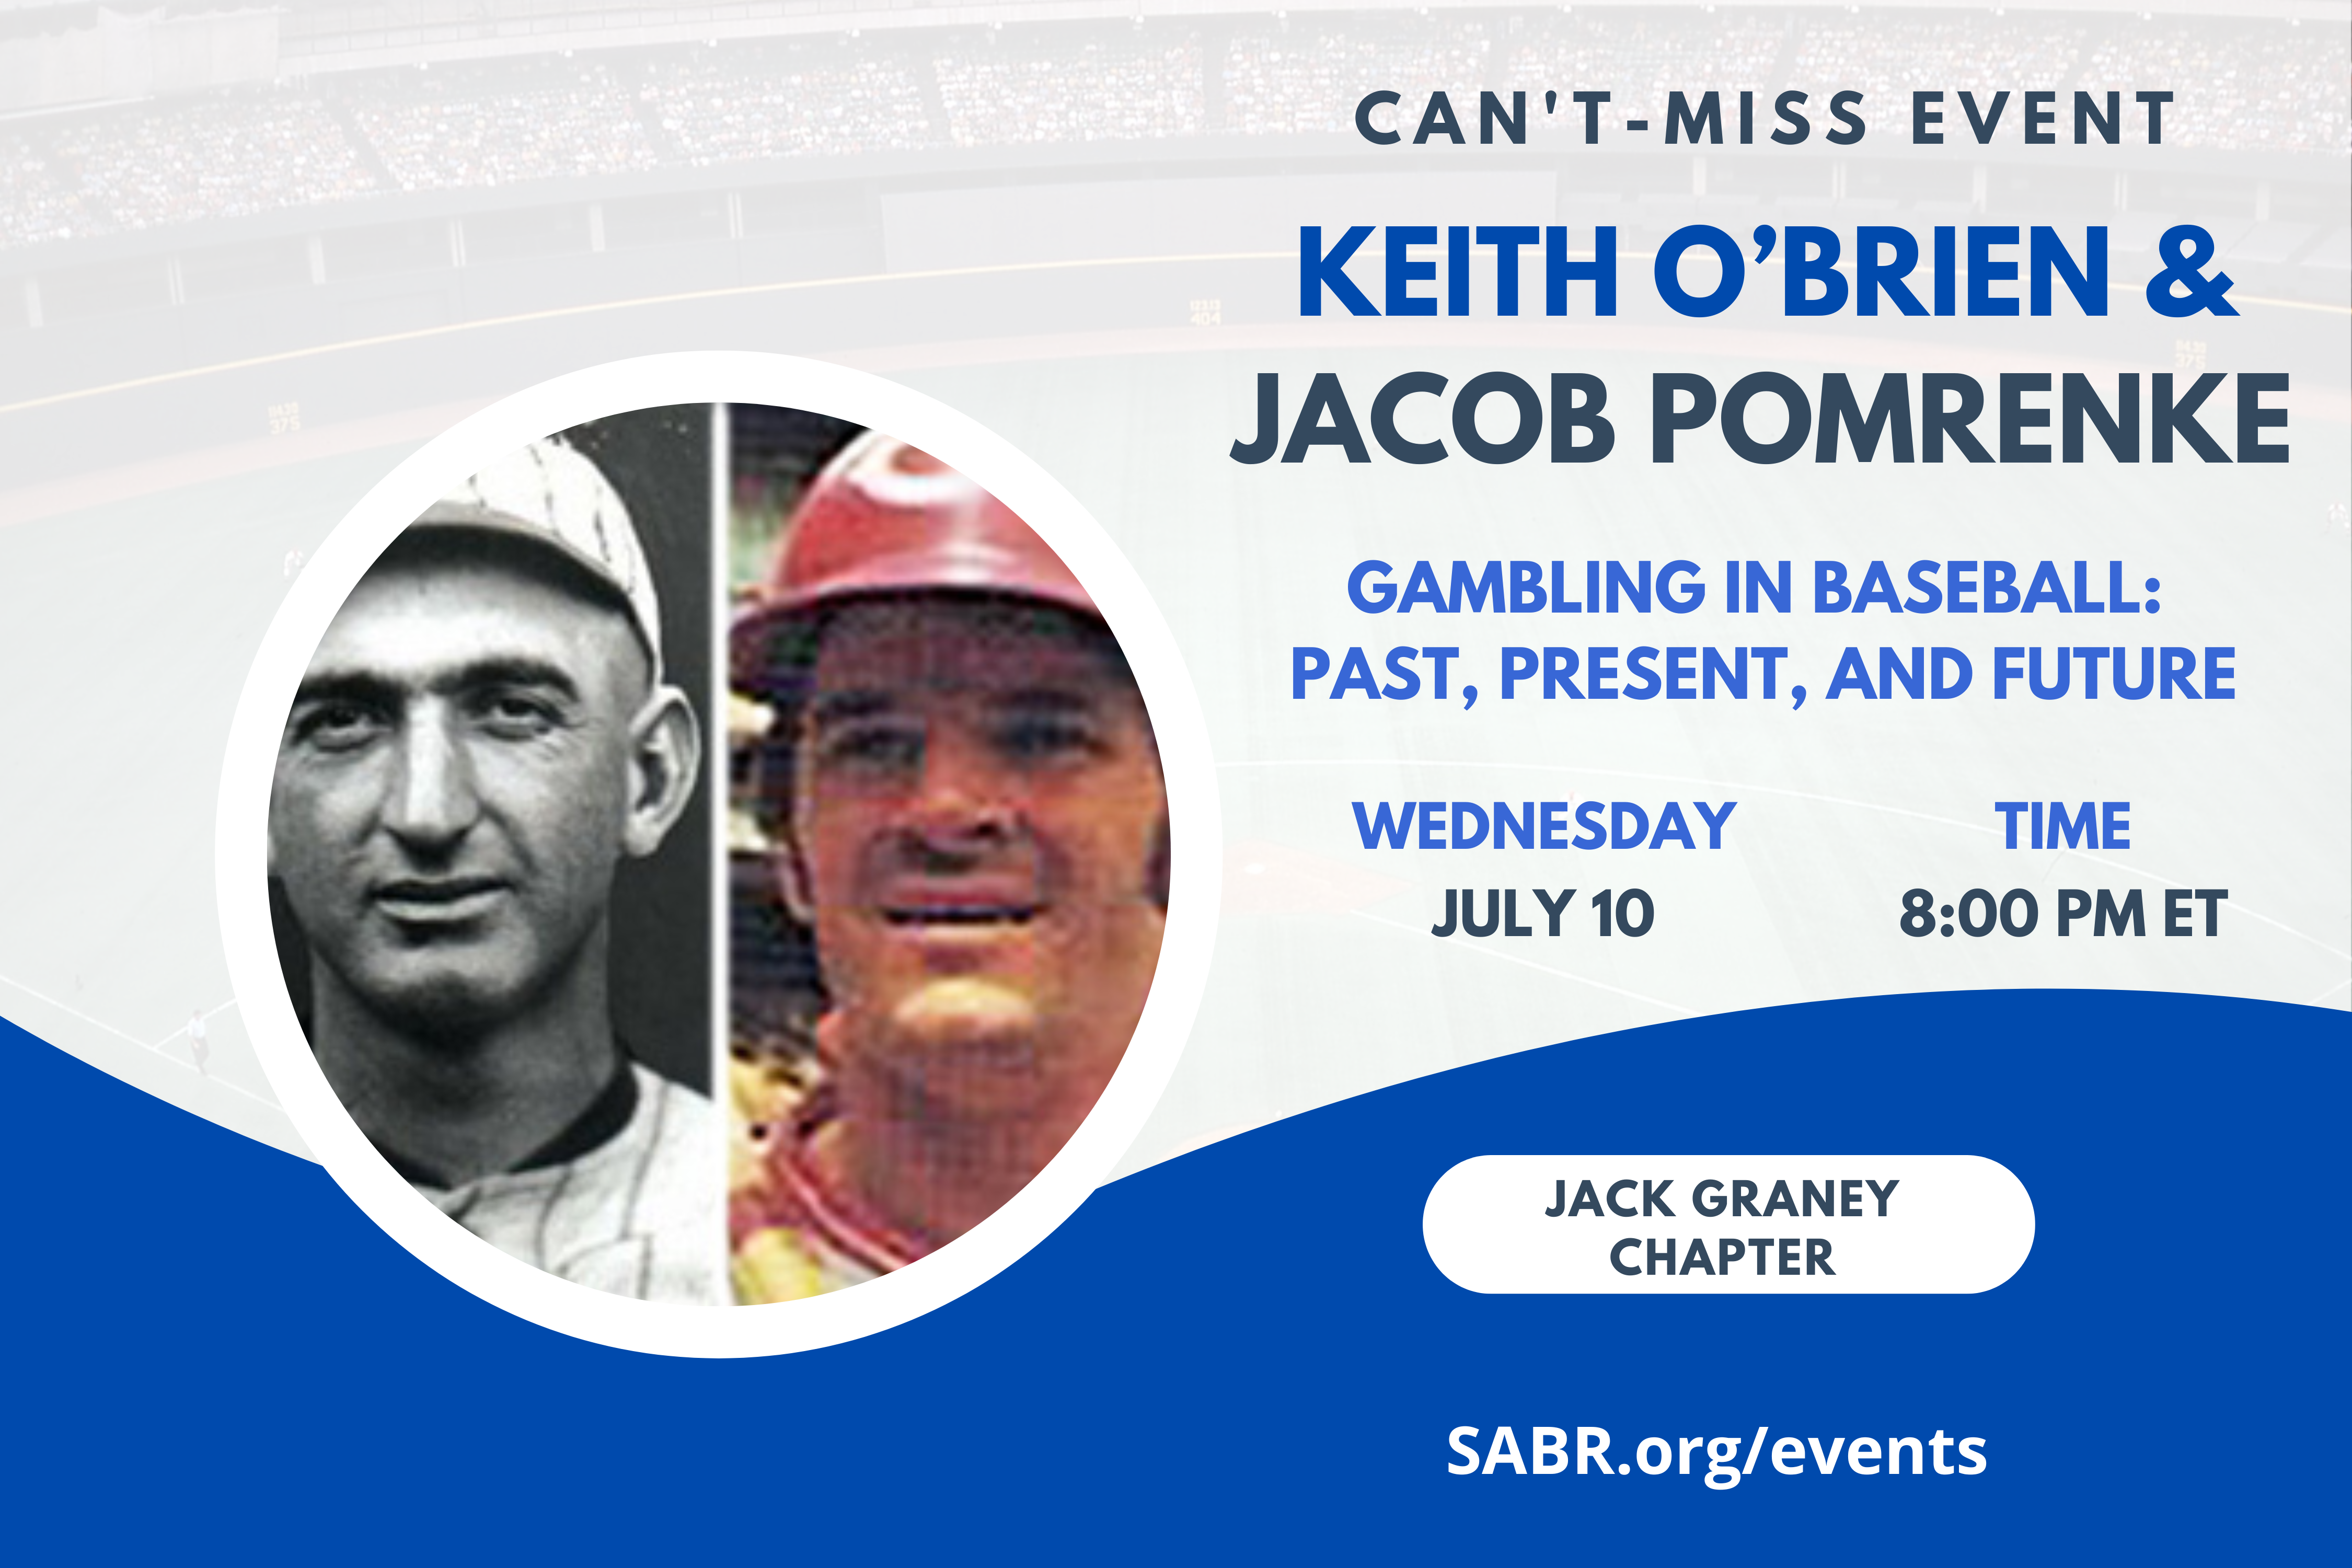 The Jack Graney Chapter in Cleveland, Ohio, will host a Zoom meeting on the topic of “Gambling in Baseball: Past, Present, and Future” on Wednesday night, July 10 at 8:00 pm EDT. All baseball fans are welcome to attend. We have two great speakers lined up for this meeting: Keith O’Brien, author of the NYT bestselling Charlie Hustle, and Jacob Pomrenke of SABR's Black Sox Committee. 